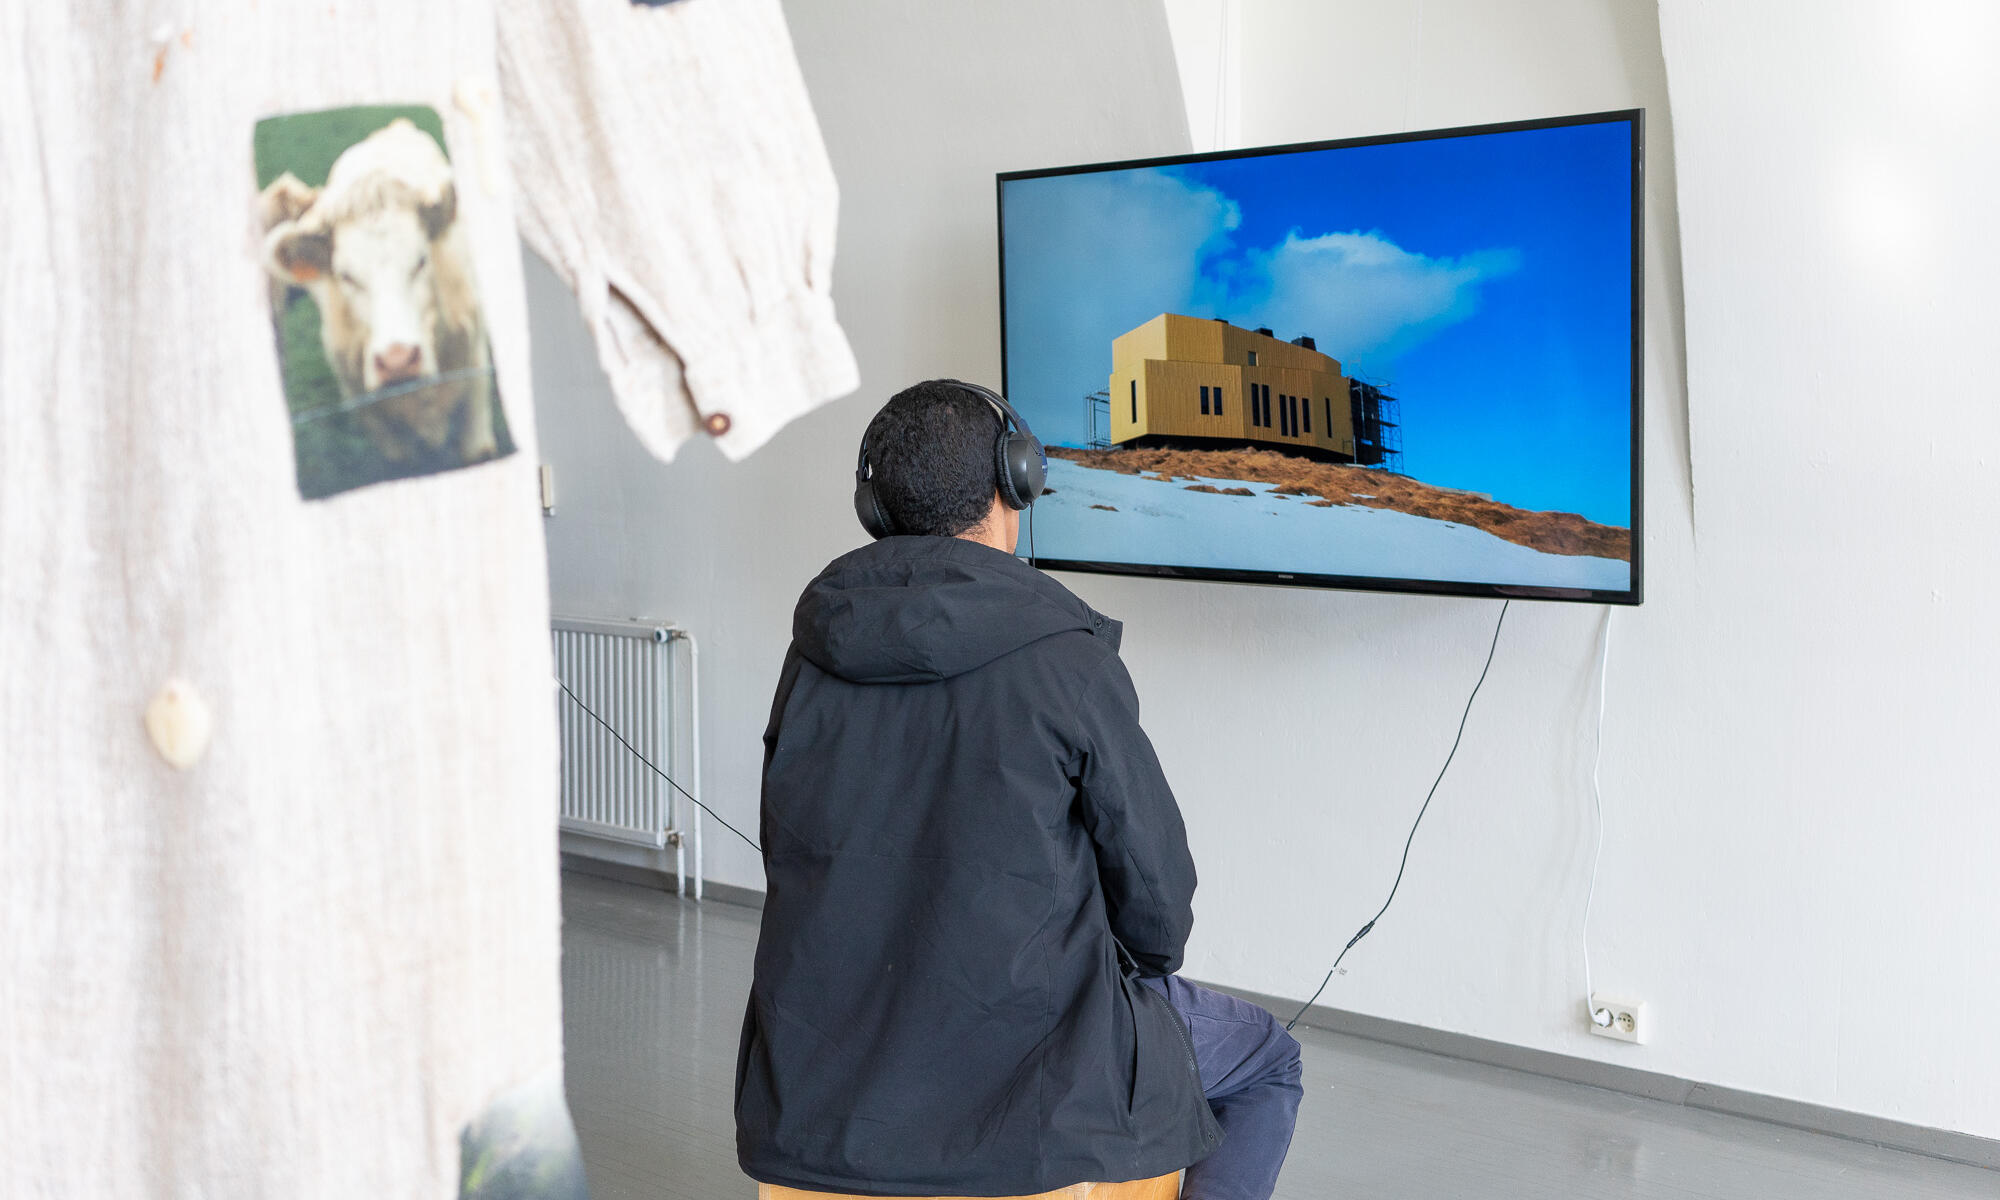 A person among art works is watching a screen in Research Pavilion exhibition.